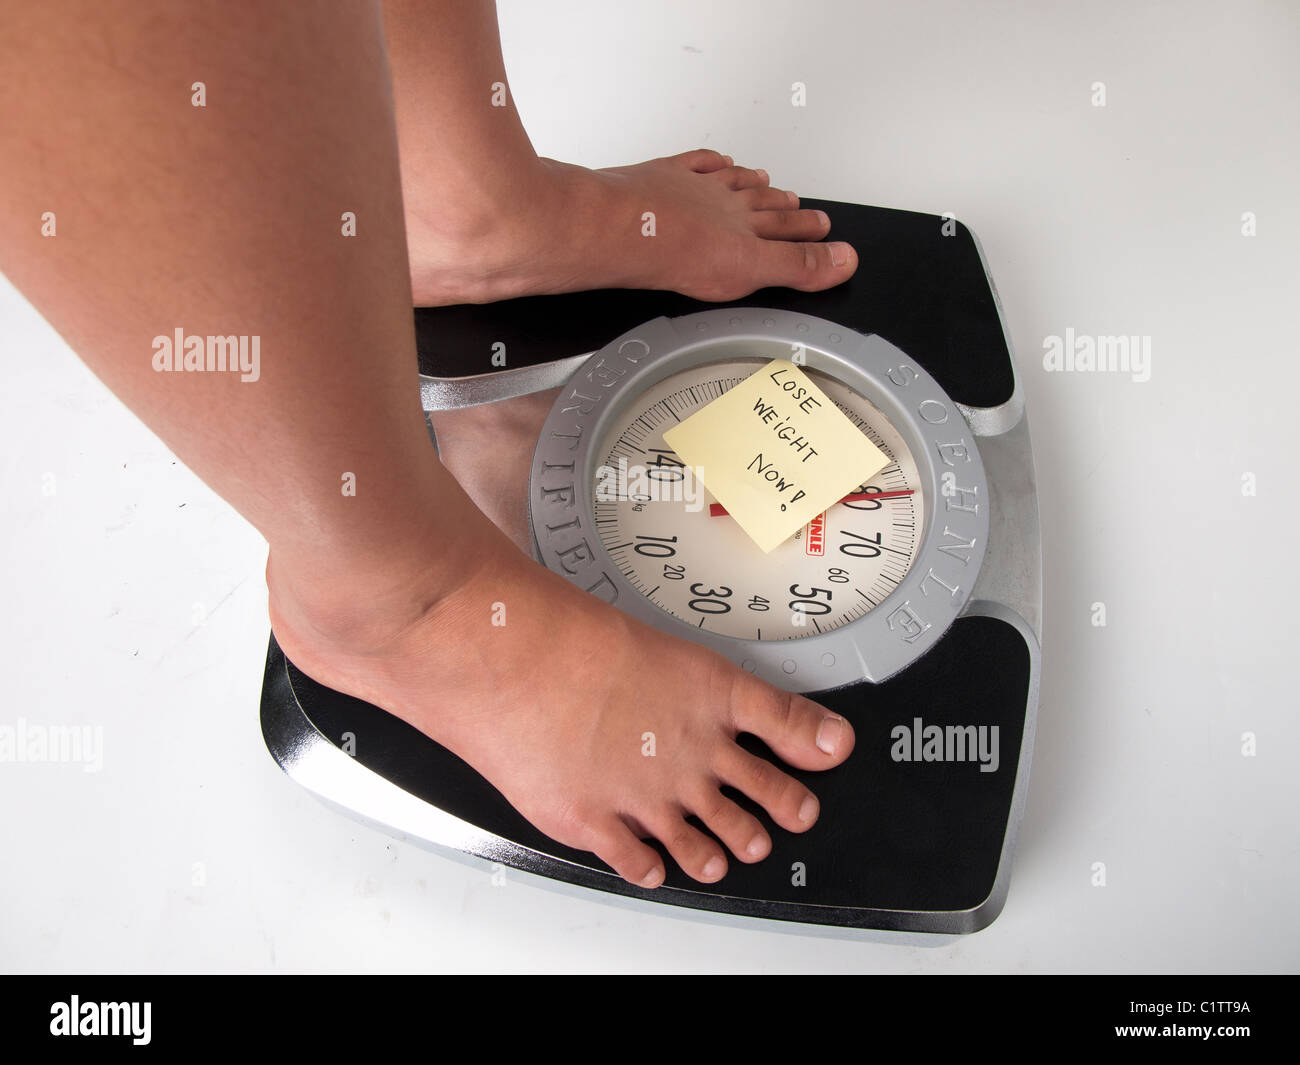 Packed Of Sausages On Weight Scale Stock Photo by ©SimpleFoto 58449845